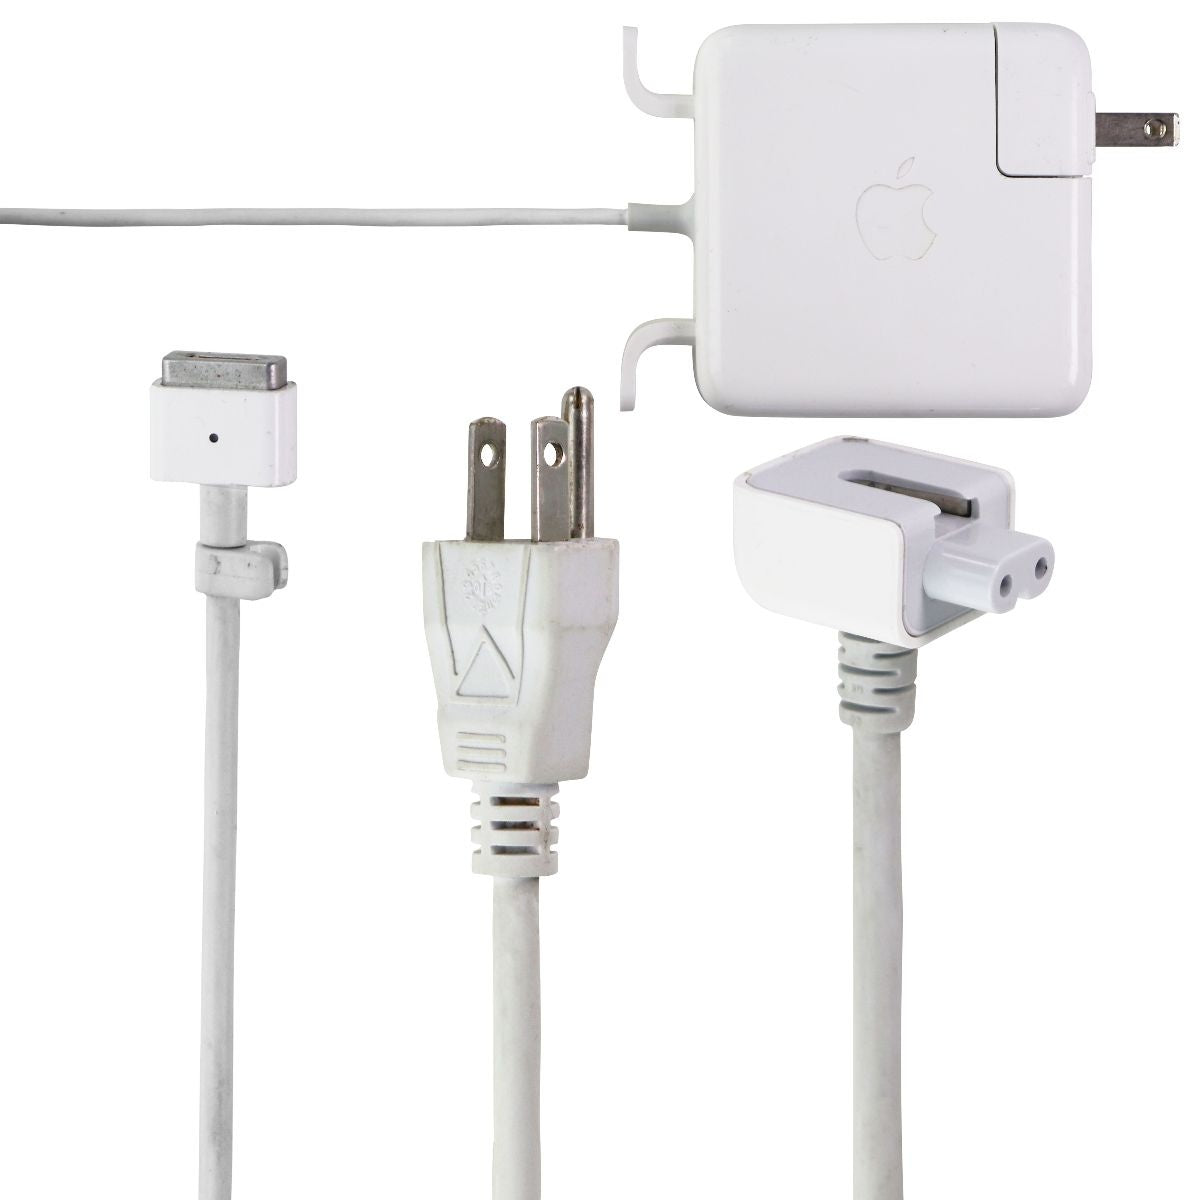 Apple 60W MagSafe Power Adapter w/ Wall Plug & Cable (A1184, Old Gen Connetor) Computer Accessories - Laptop Power Adapters/Chargers Apple    - Simple Cell Bulk Wholesale Pricing - USA Seller